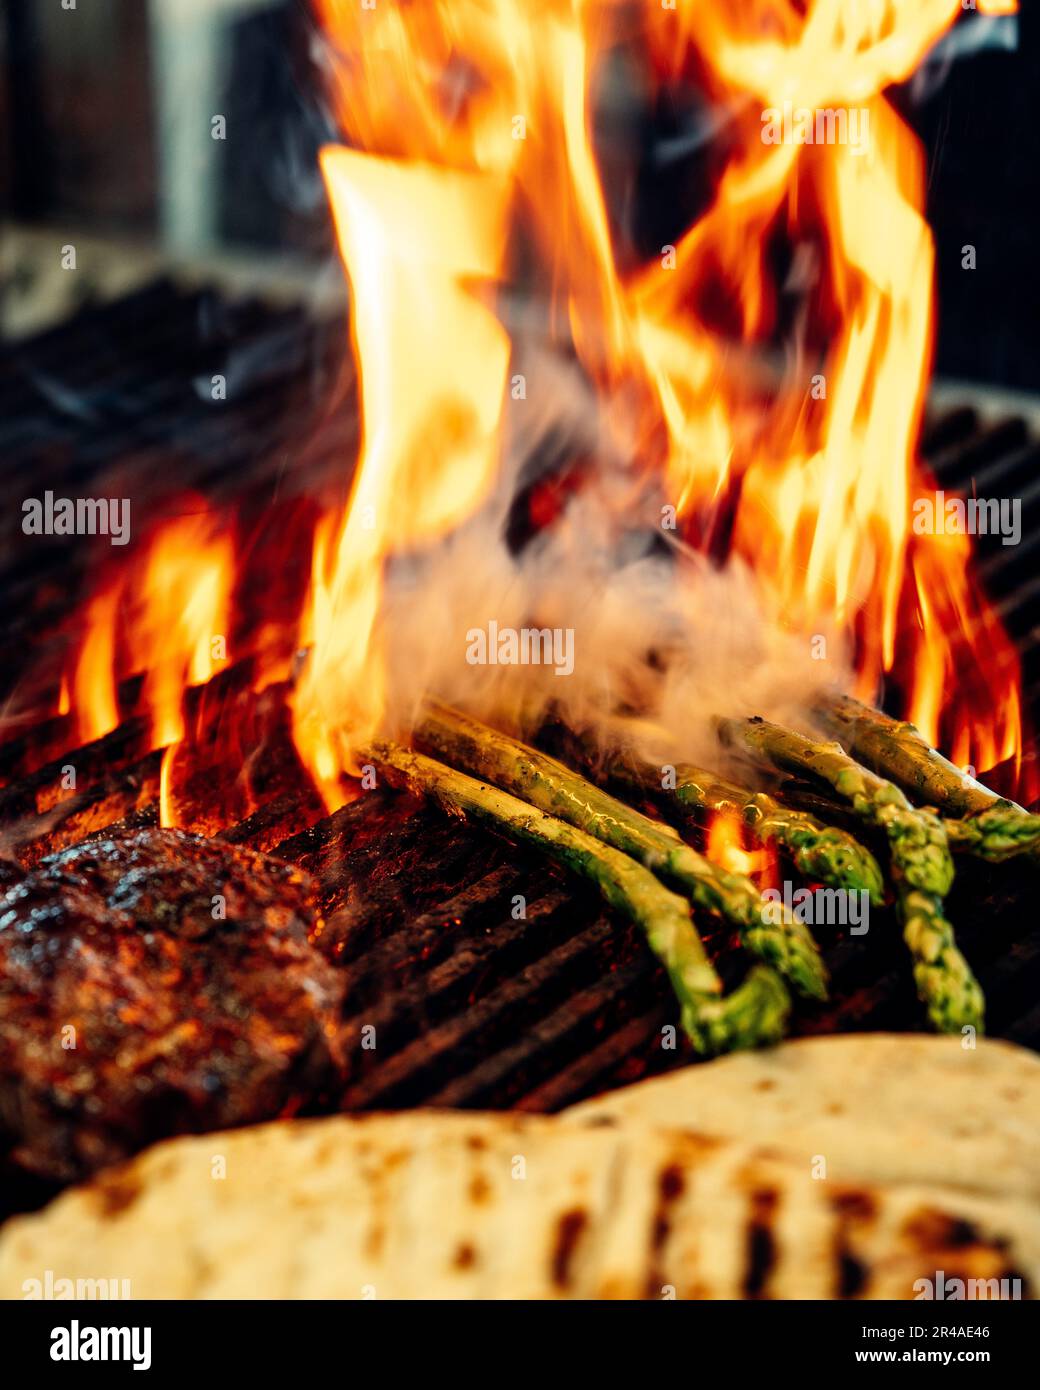 A close-up of a charcoal grill with a variety of meats, vegetables, and other food items being cooked Stock Photo